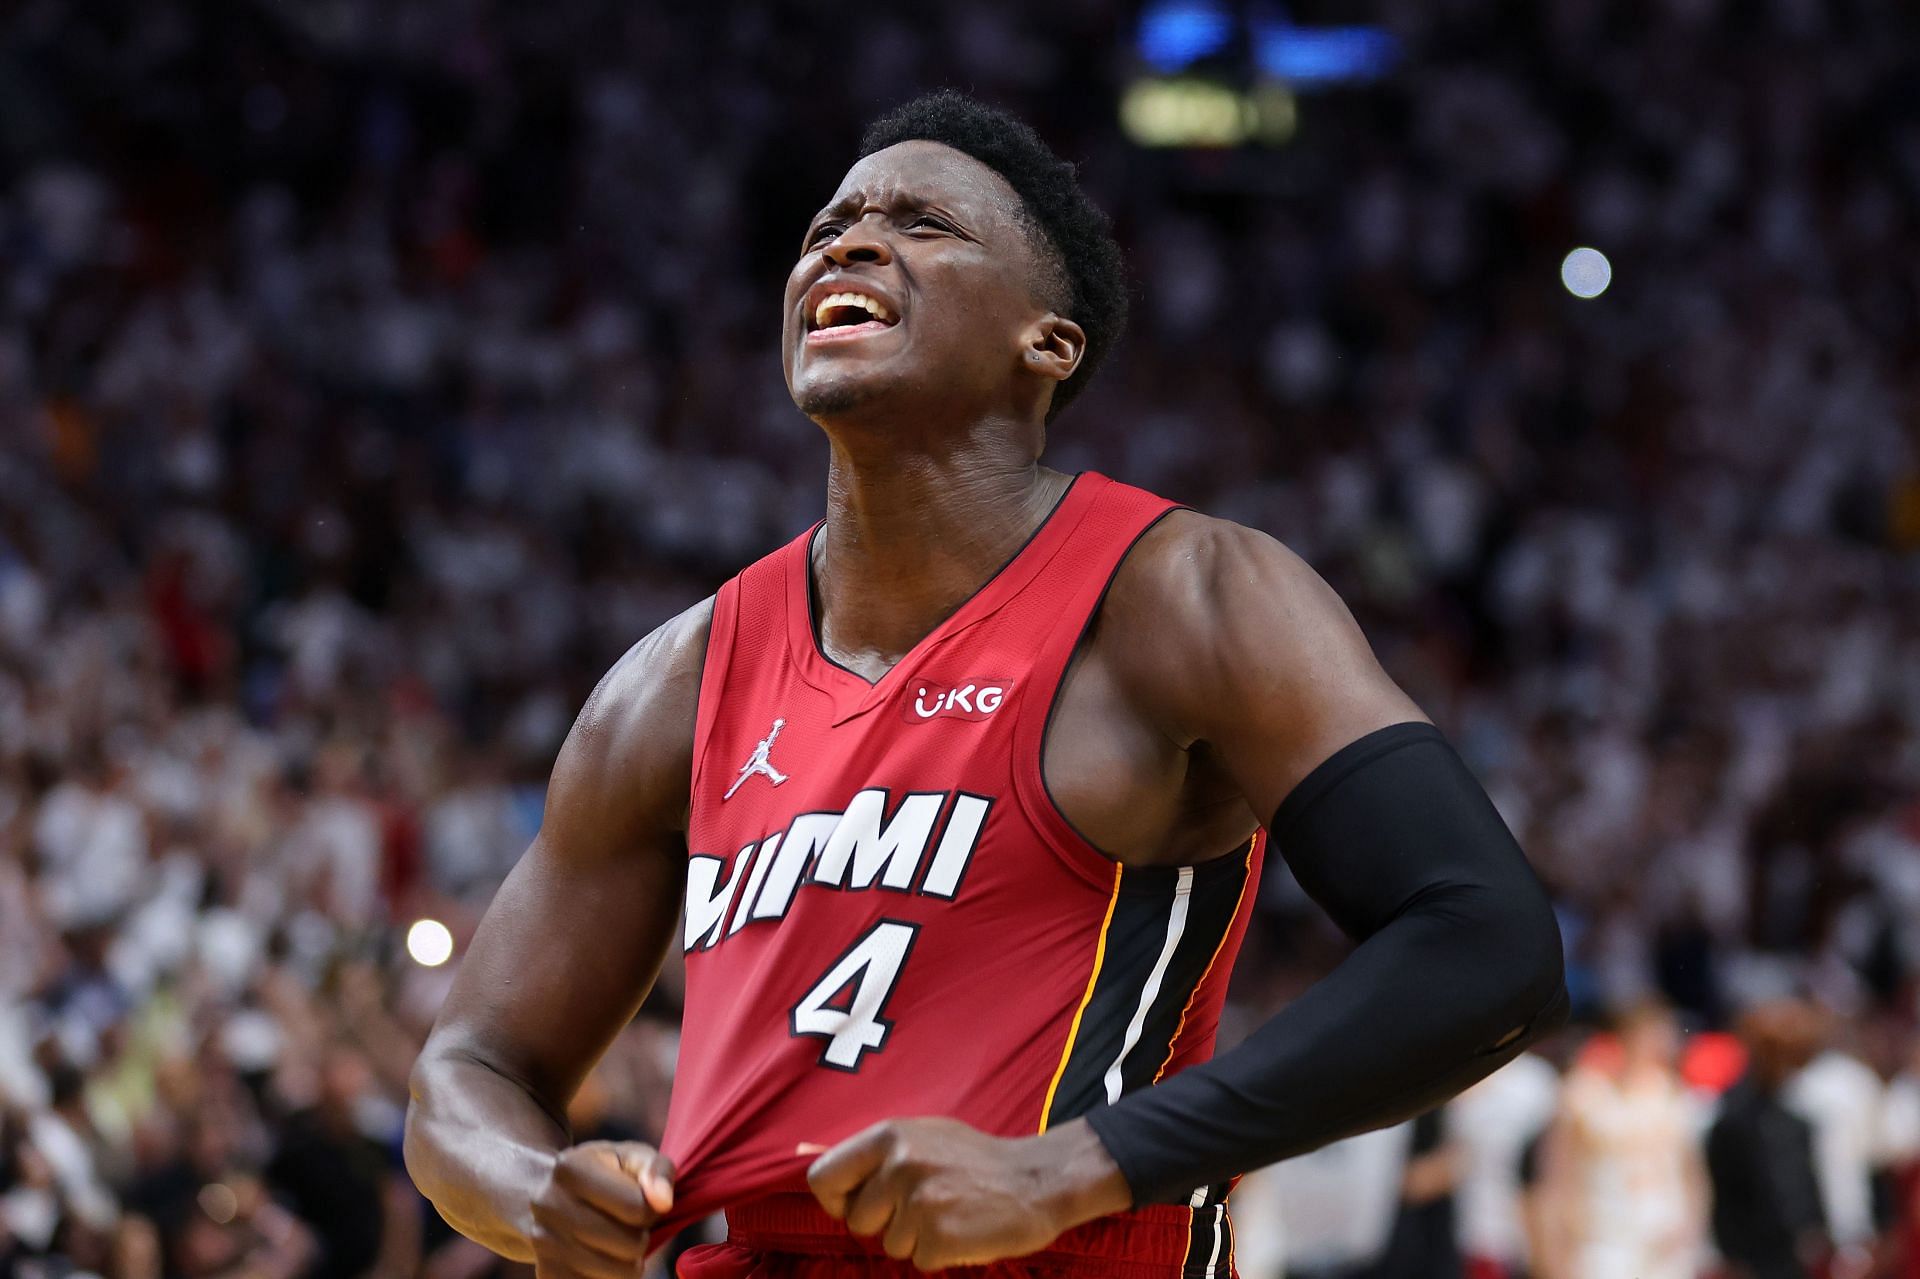 Victor Oladipo leads the Heat with 23 points as they eliminate the Hawks.